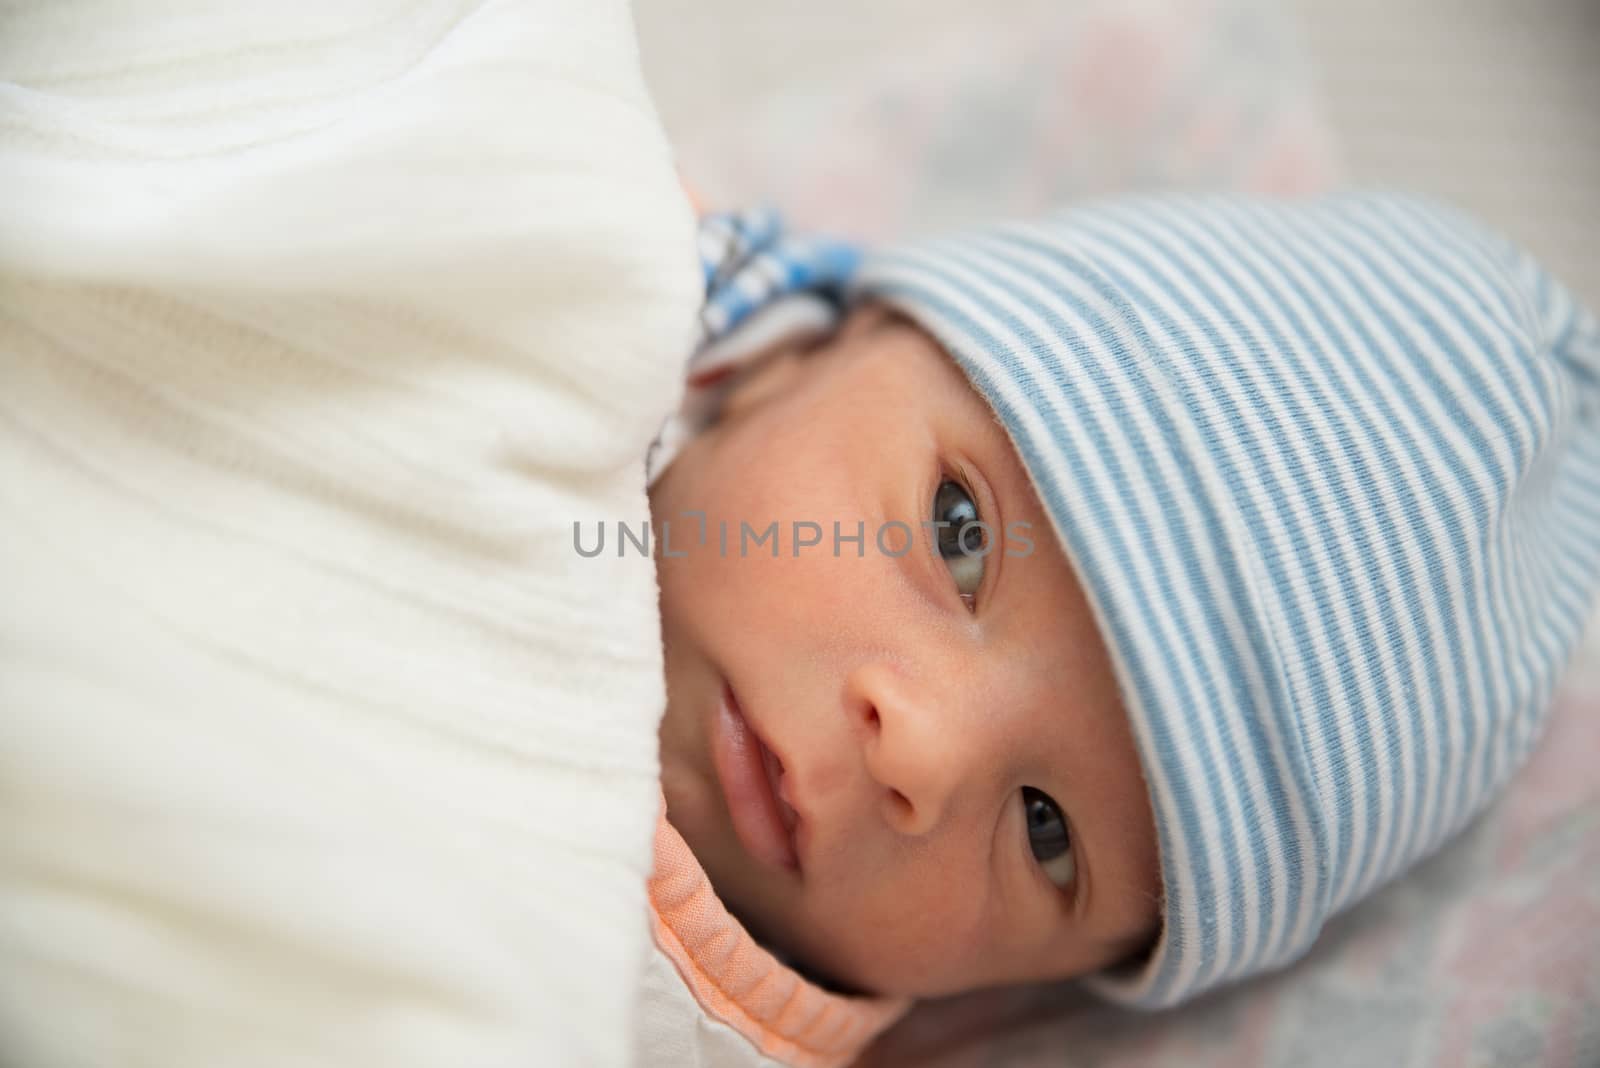 Cute Eurasian newborn baby boy lying on bed and wearing a striped cap